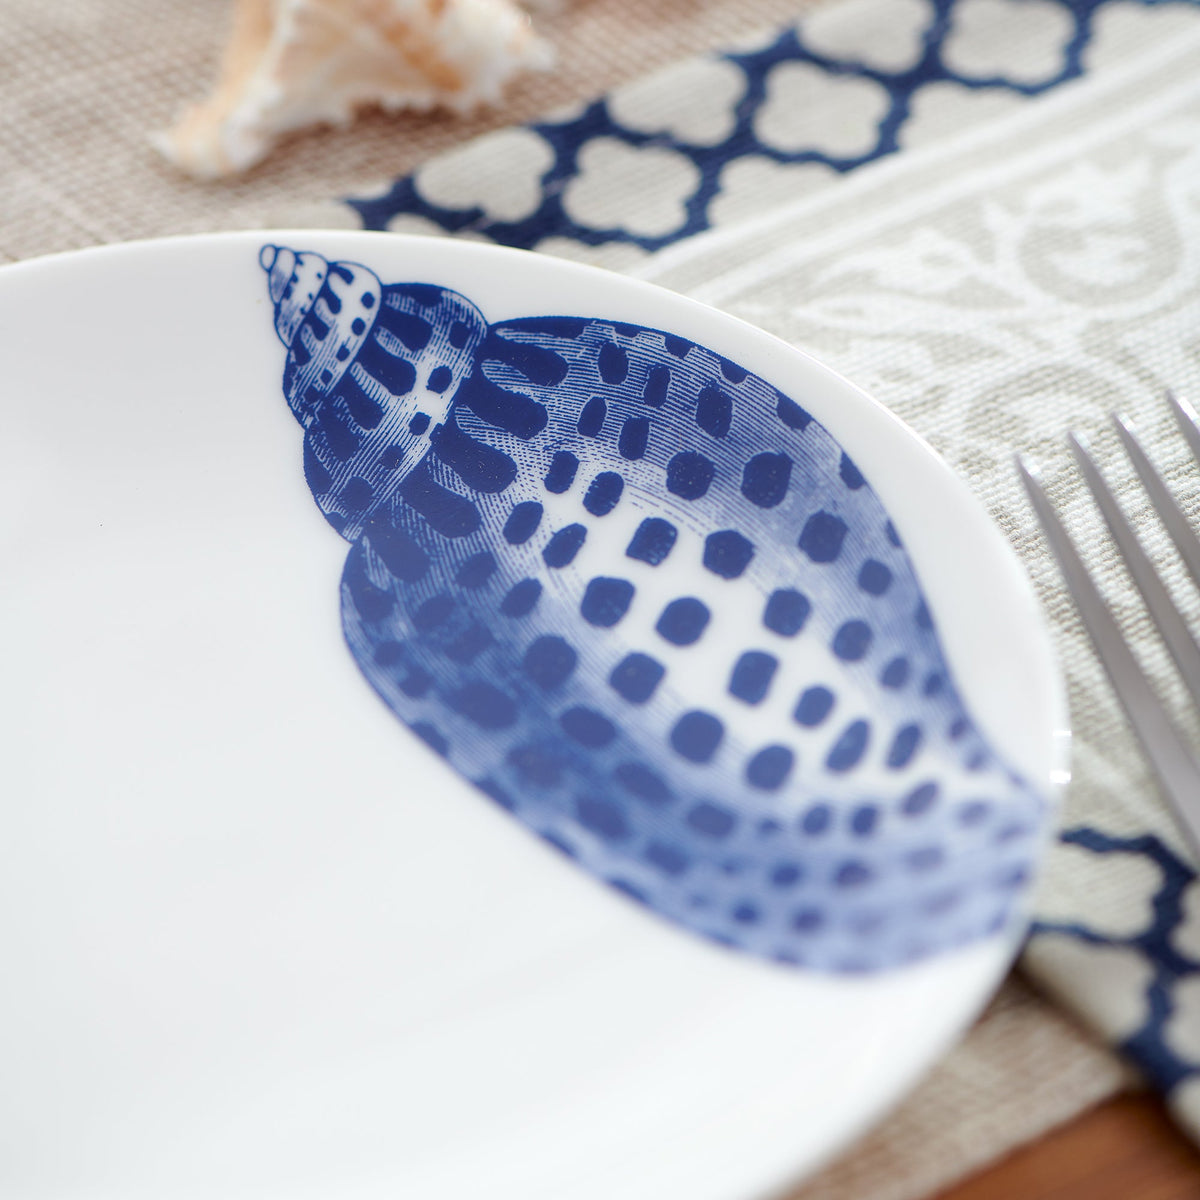 A white plate with a blue seashell design, part of our Caskata Artisanal Home Shells Small Plates, is placed on a patterned tablecloth next to a fork and a small seashell.